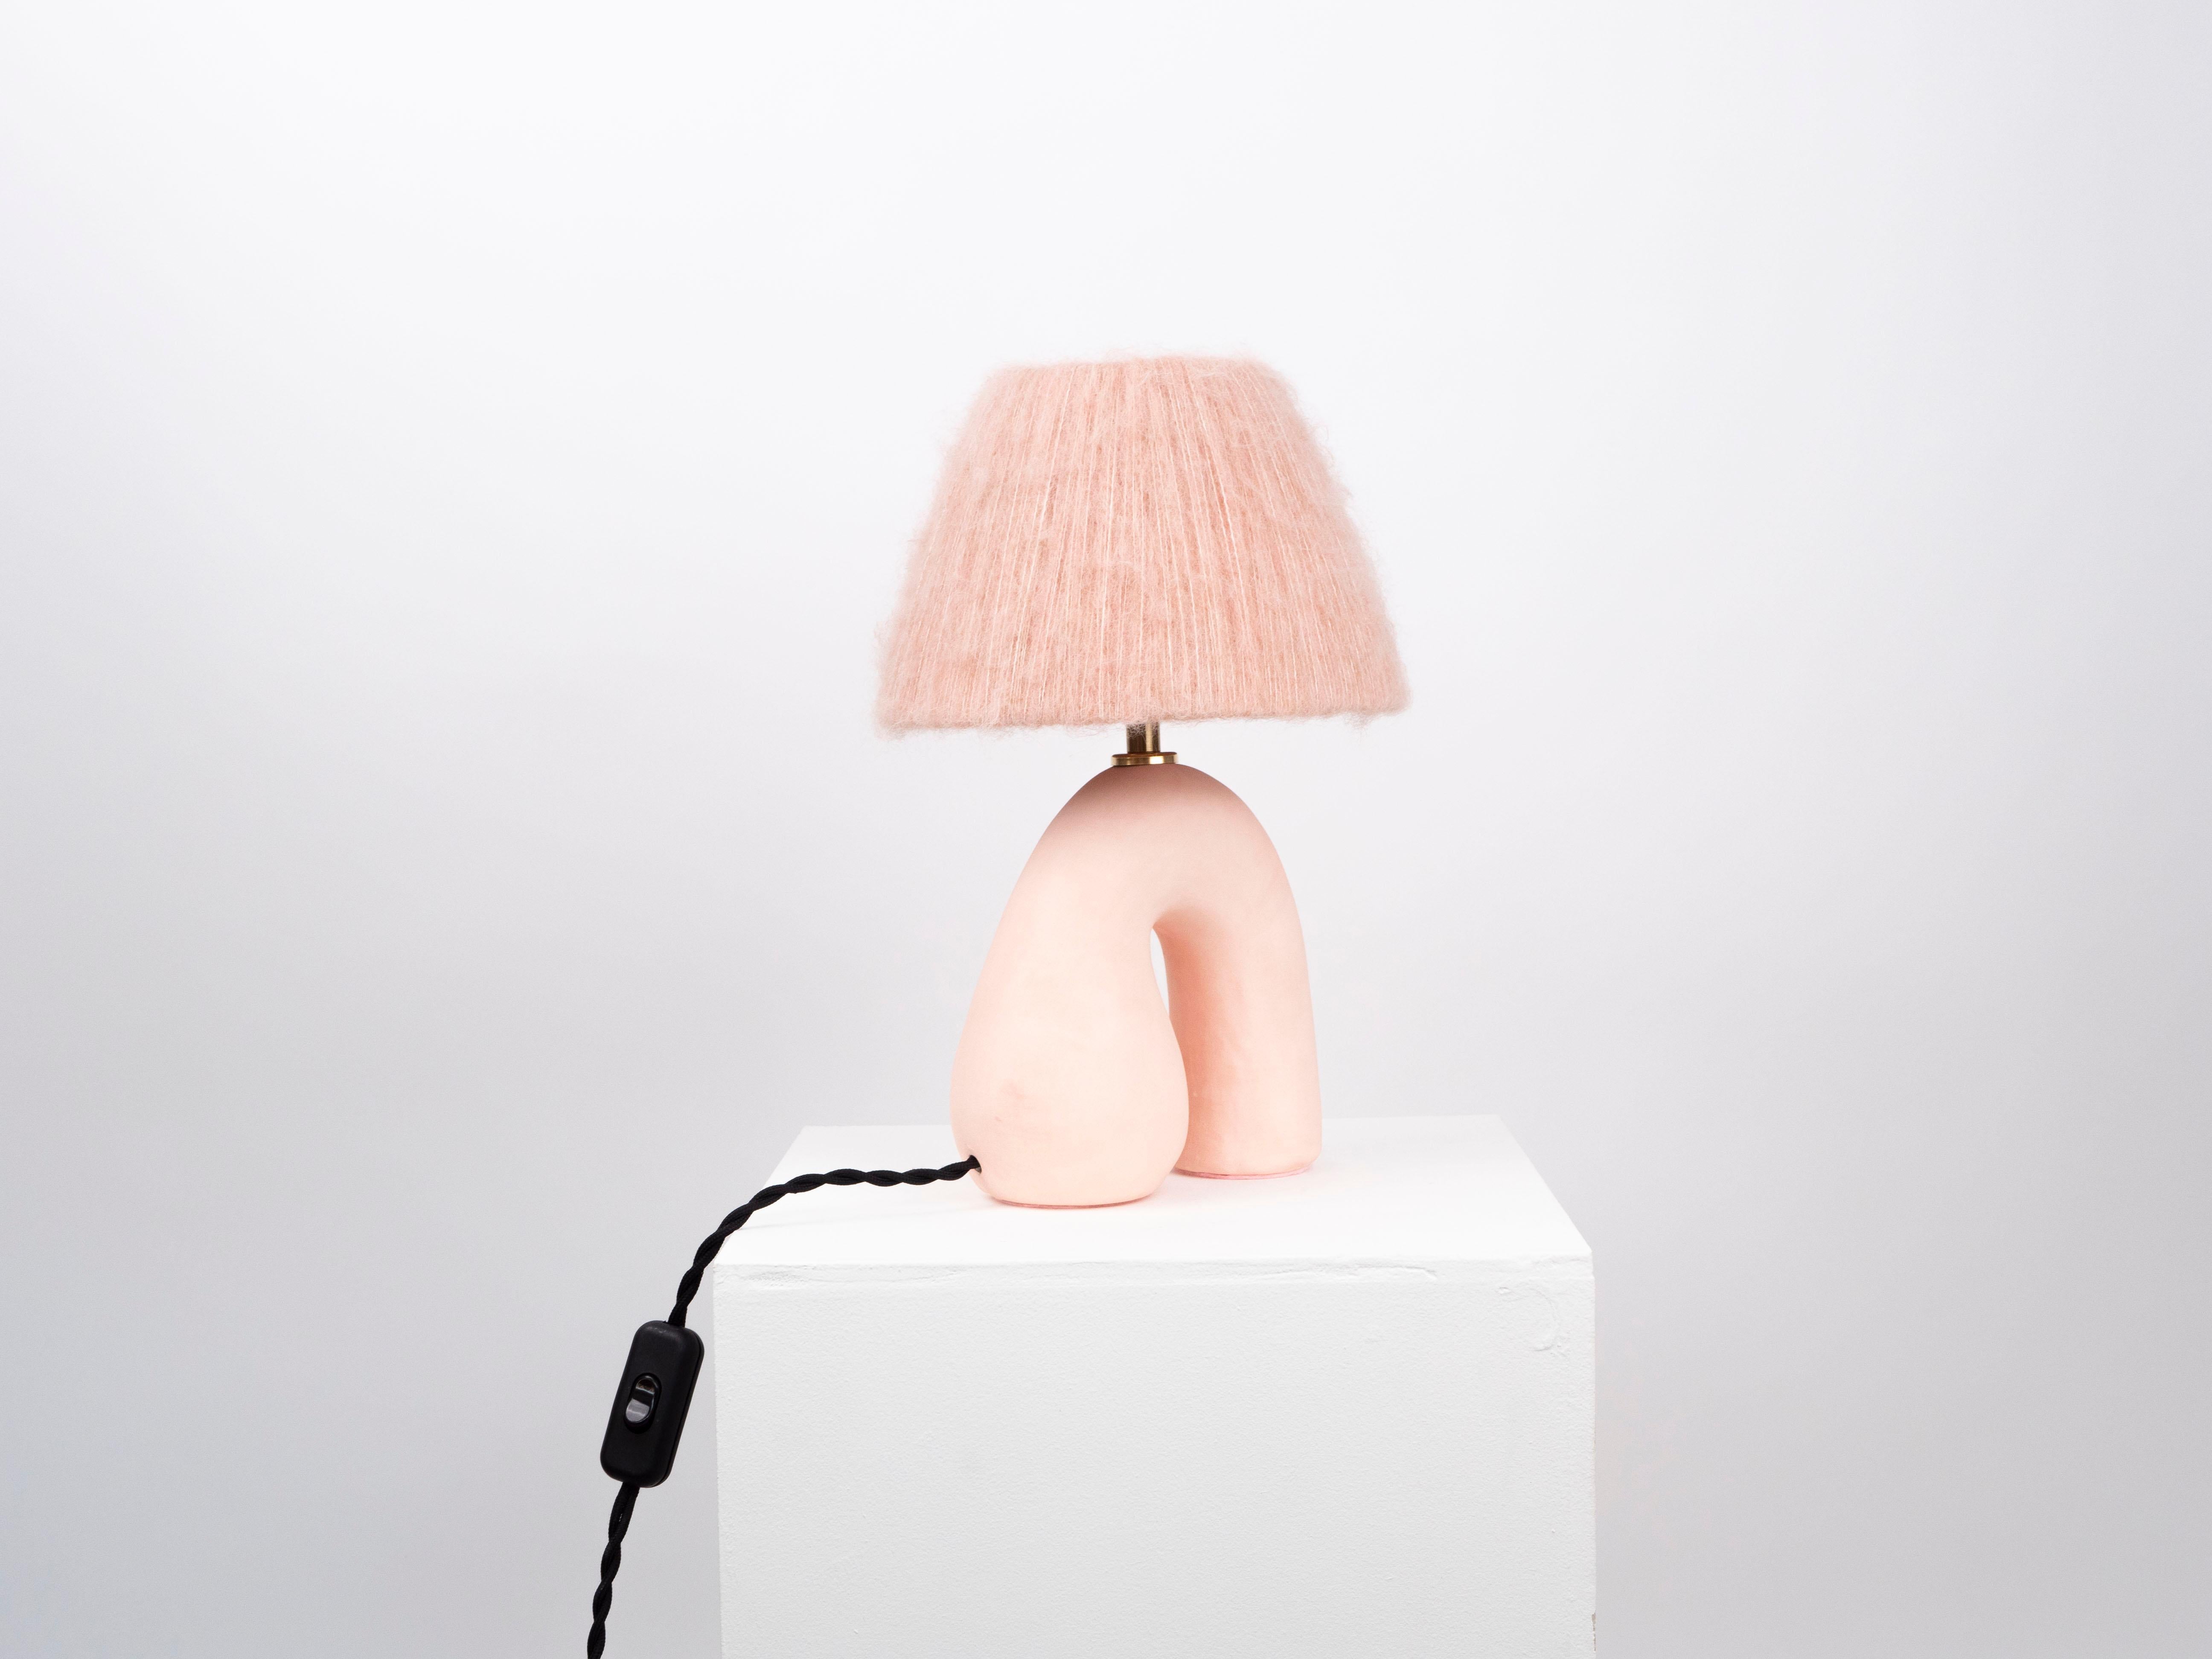 Matte pink base with a Matte Finish and Shade.

Estimated processing time is 2 weeks from order confirmation.

Pictured with a Mini Globe LED E27 Bulb. Bulb not included.

To pair this base with a shade in an alternative colour or Material, click